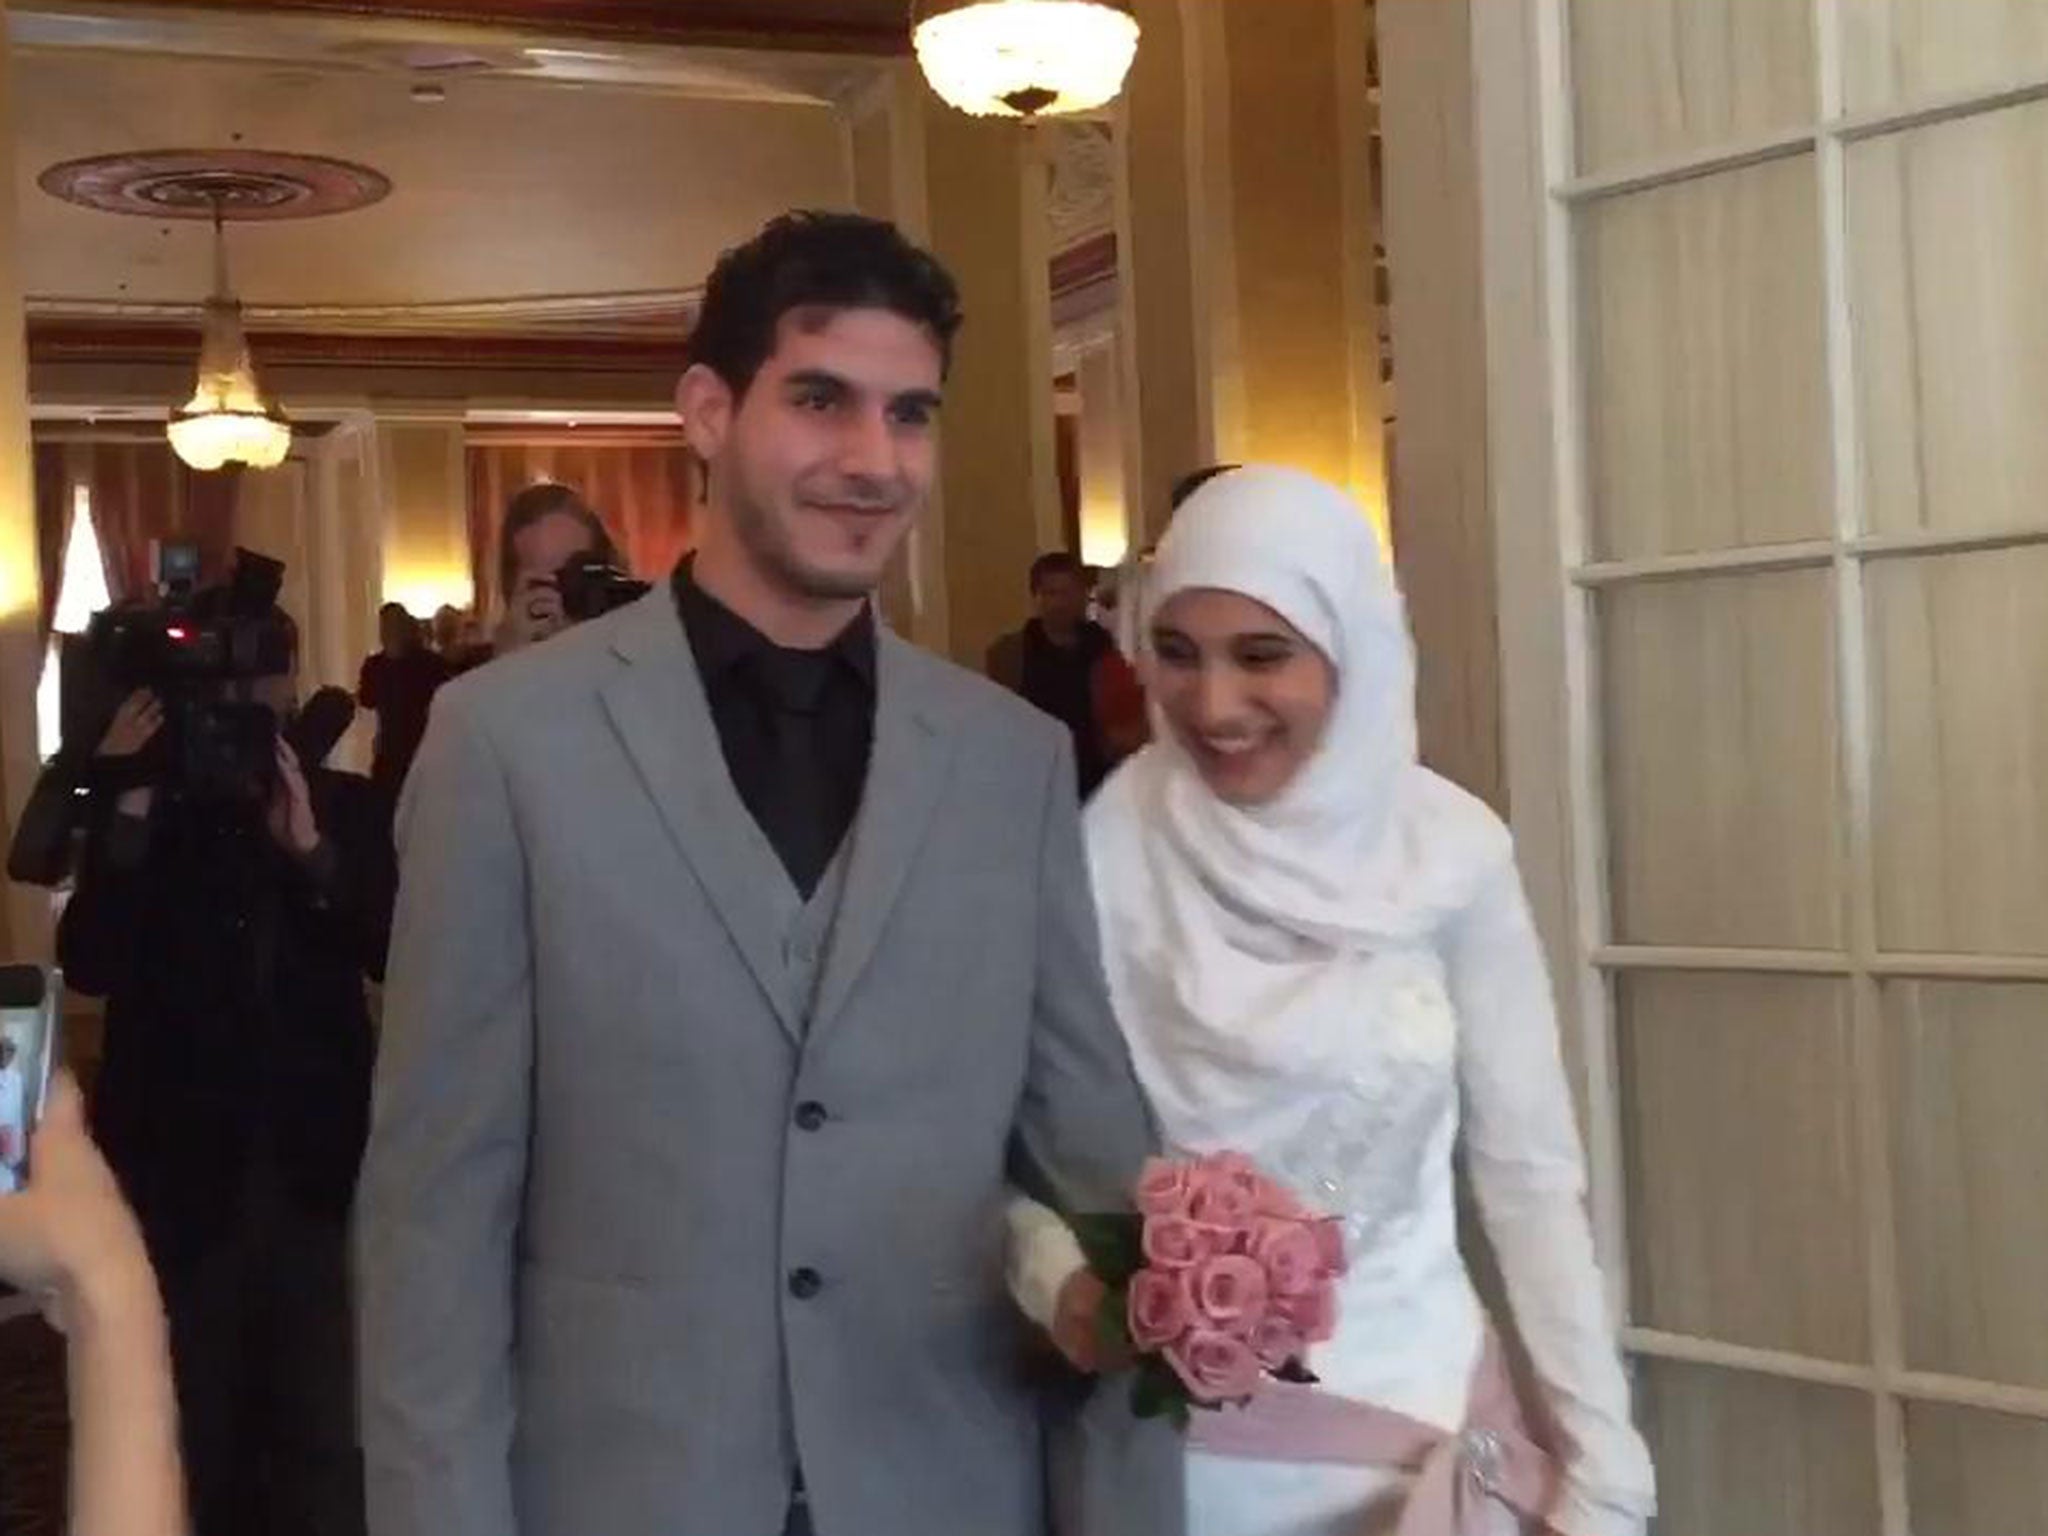 Mohamad Al-Noury and Athar Farroukh were thrown a surprise wedding reception by local Canadians in Saskatoon on 6 December